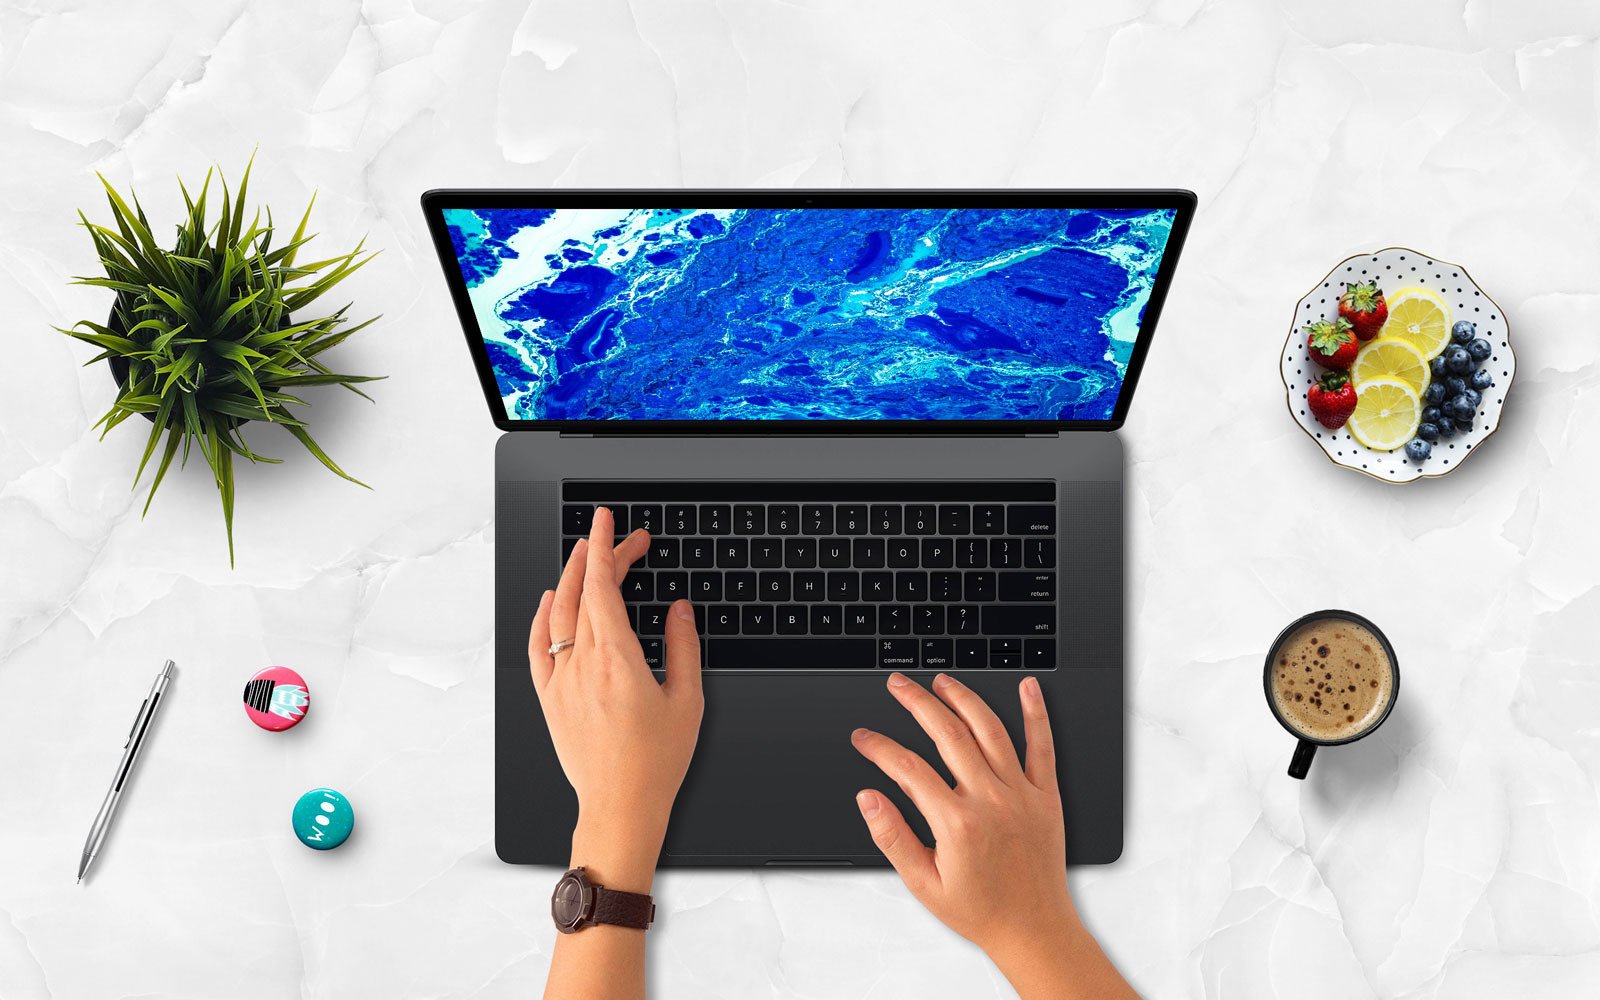 Download Laptop with Hand Product Mockup #148518 - TemplateMonster